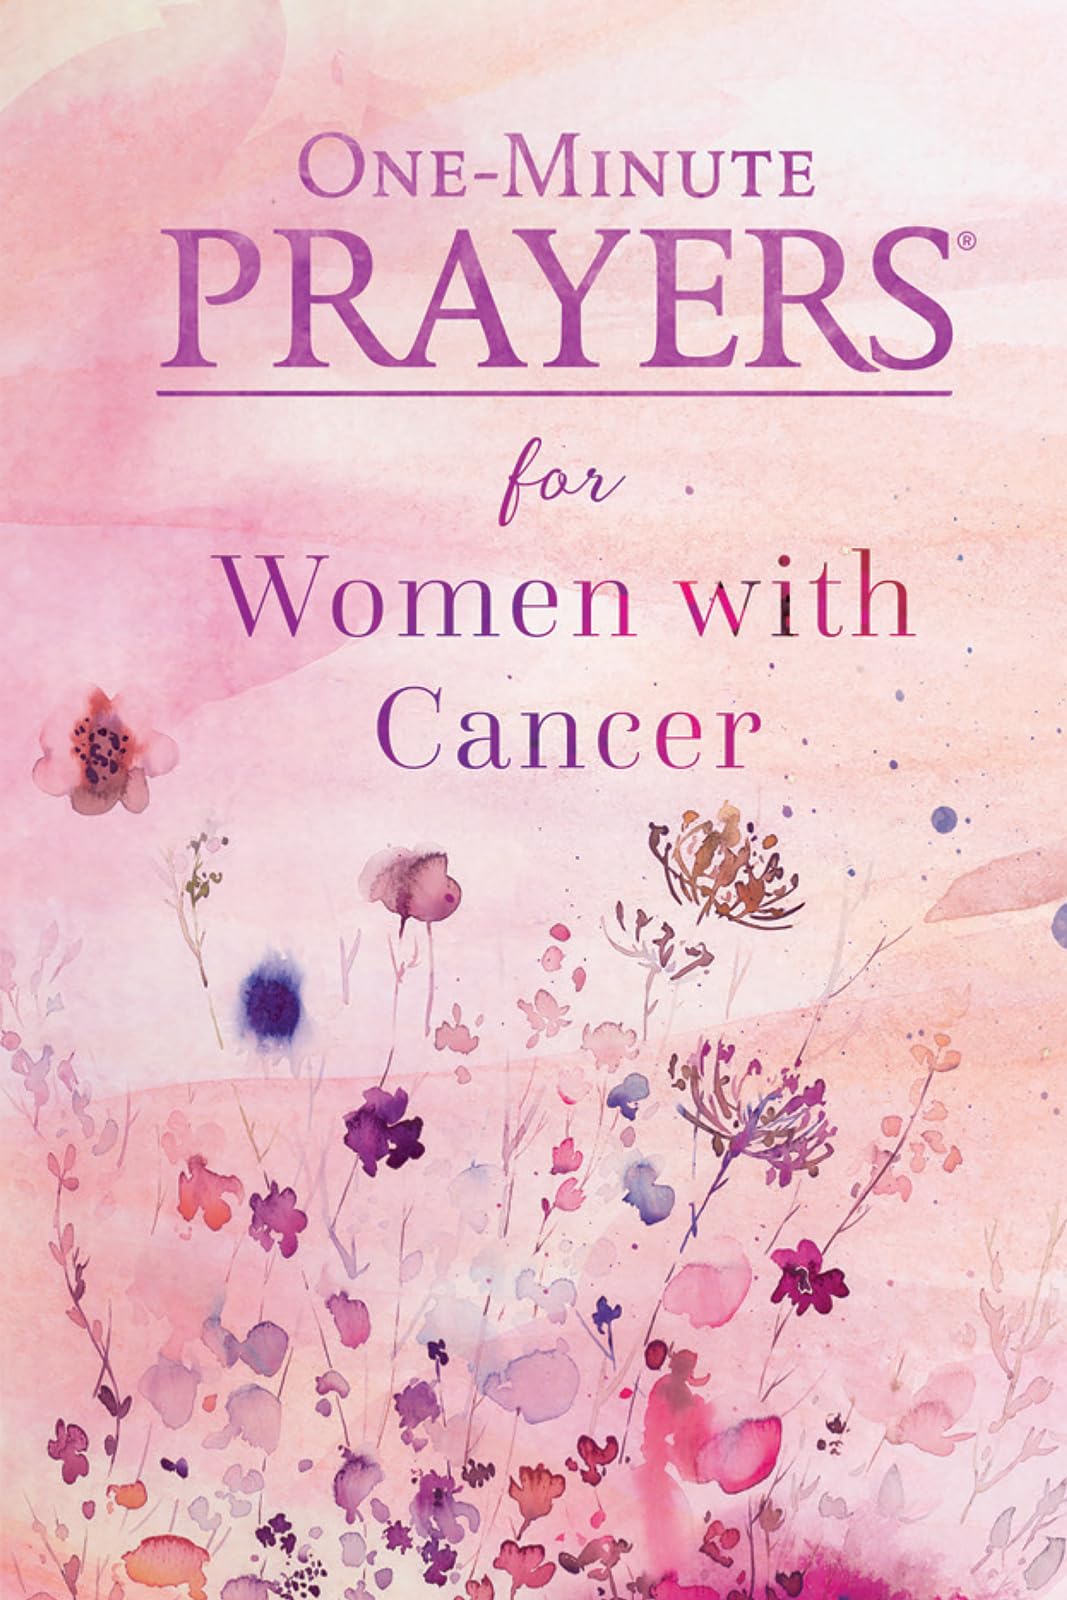 One-Minute Prayers for Women with Cancer by Hardy, Niki